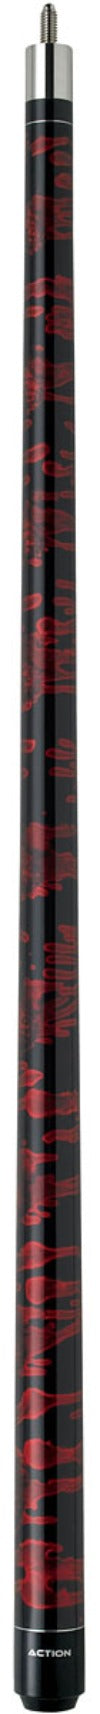 Action VAL03 Pool Cue -Action